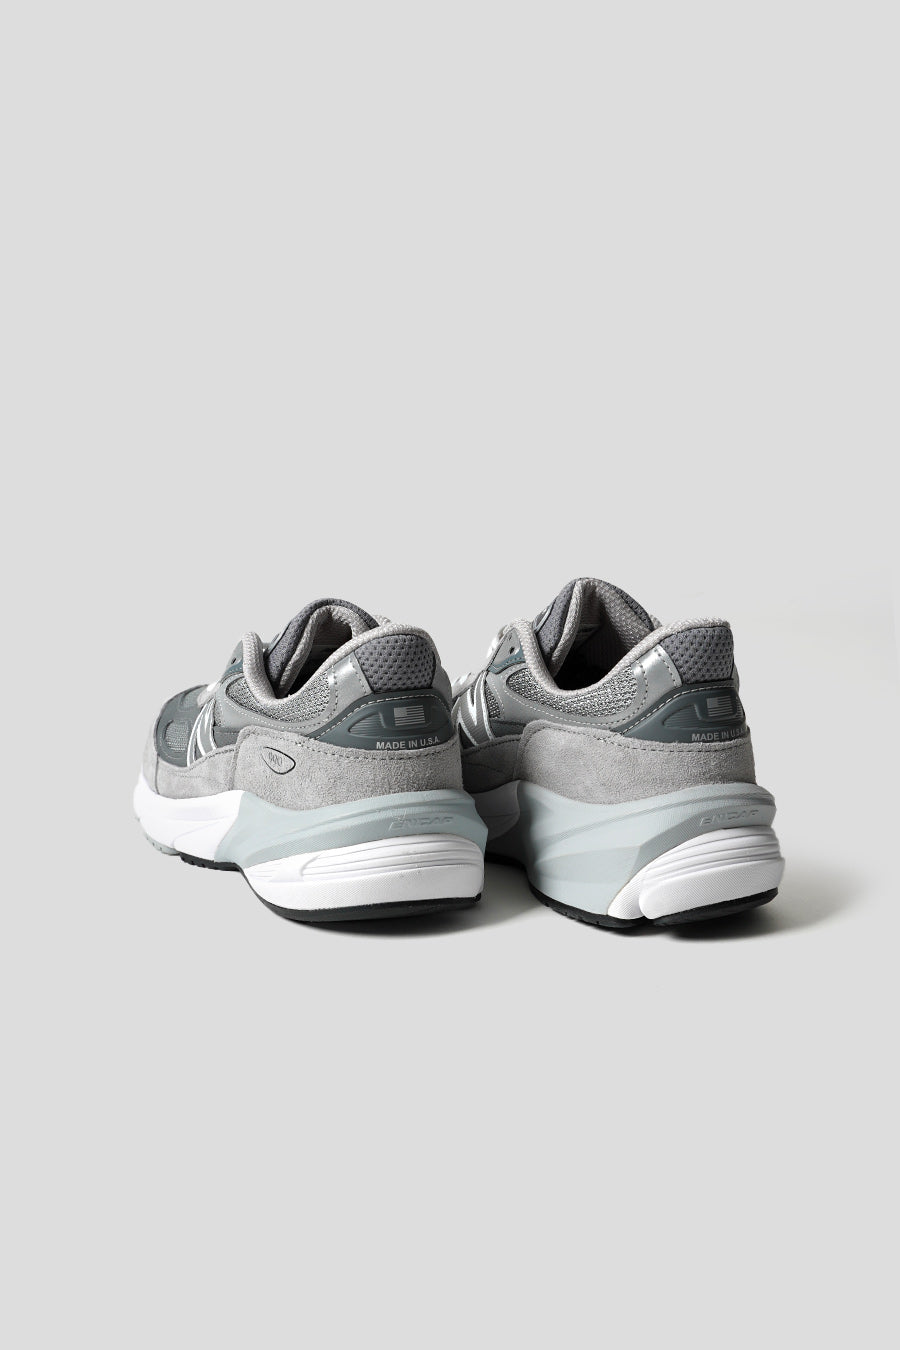 NEW BALANCE - GREY M990V6 MADE IN USA SNEAKERS – LE LABO STORE